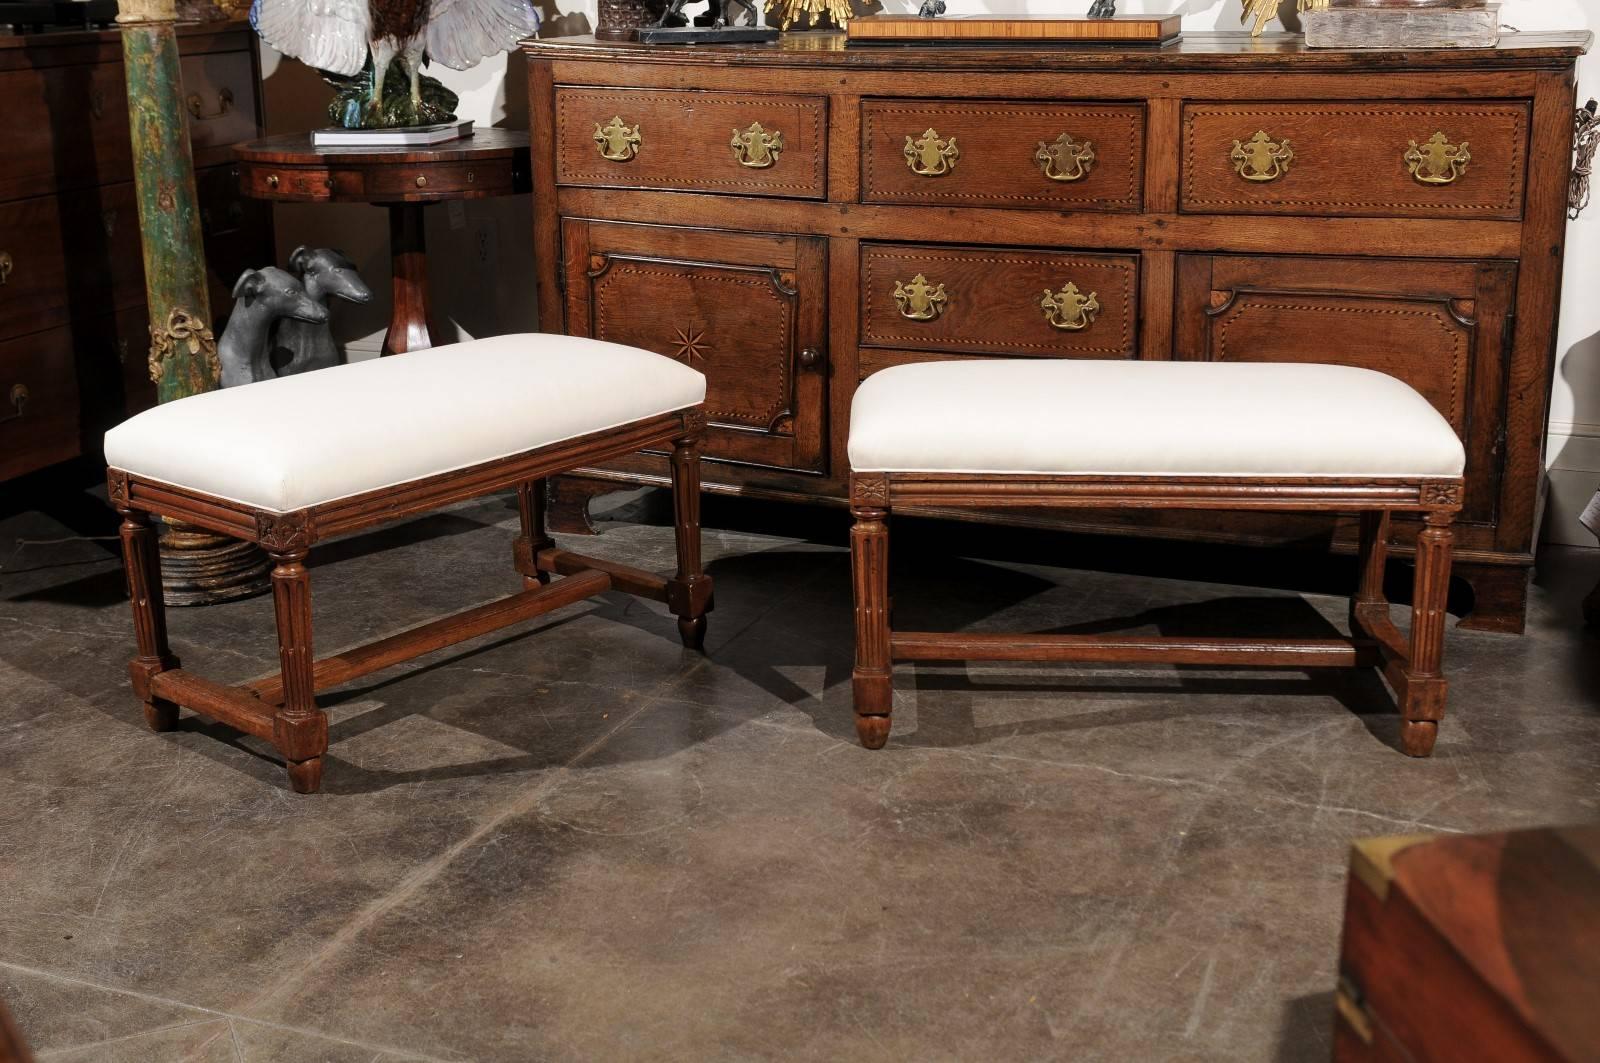 This pair of Italian small size wooden benches features an upholstered seat over a nicely carved walnut base. The reeded skirt is adorned with a rosette placed in each corner. The benches are raised on four fluted and reeded legs, joined by a cross